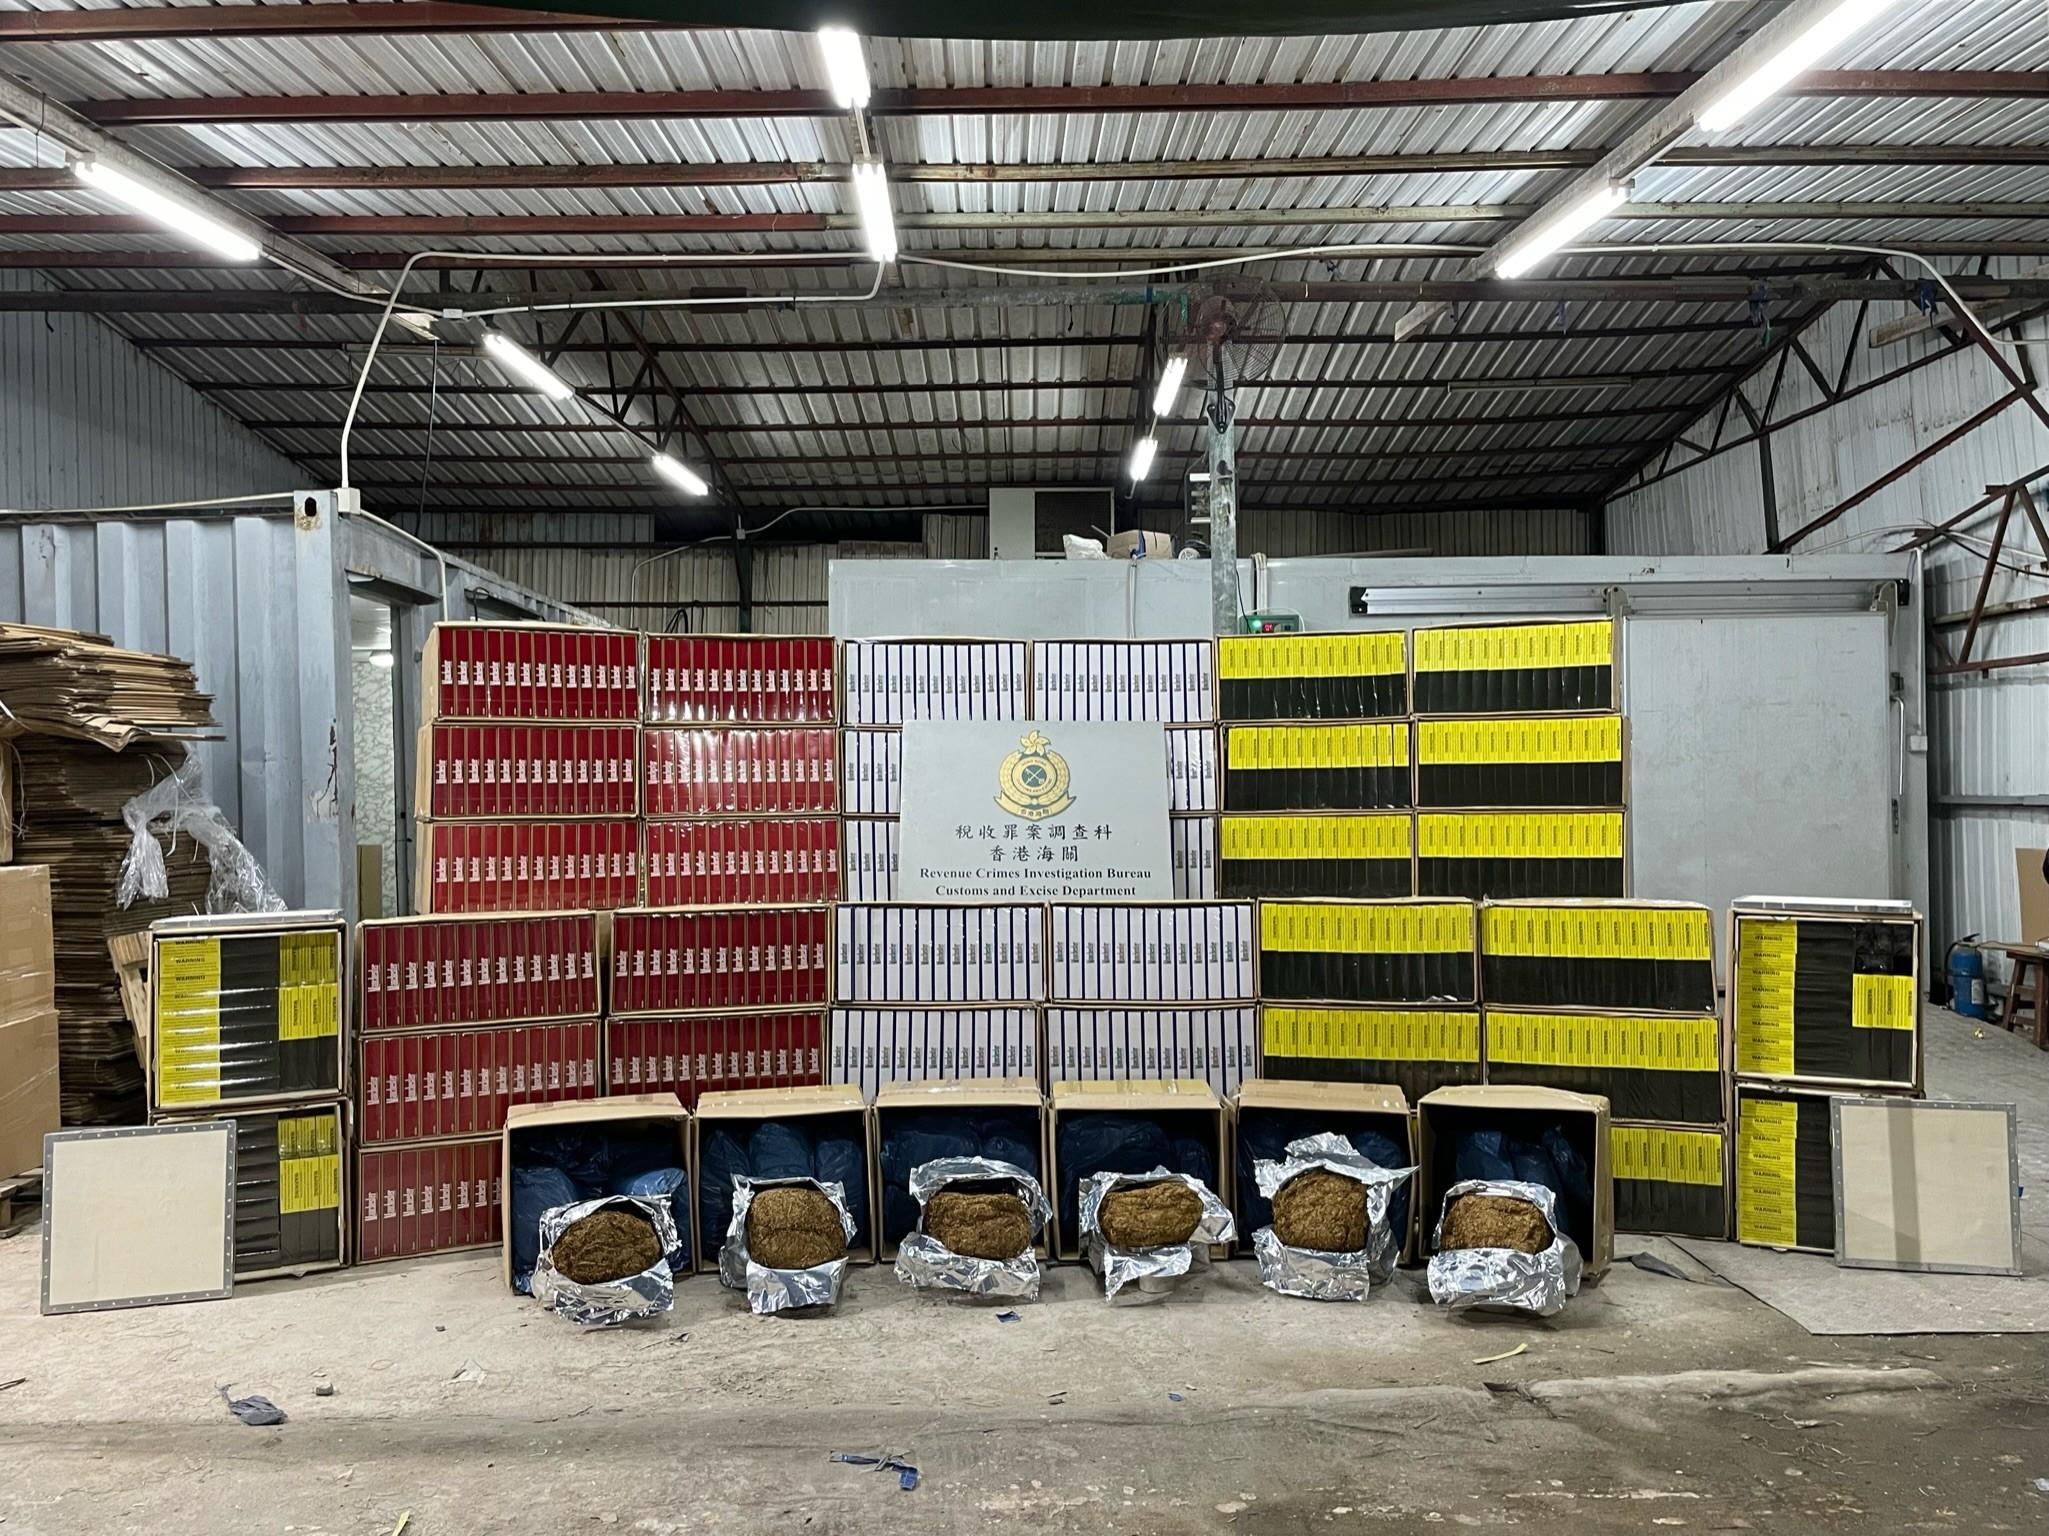 Hong Kong Customs yesterday (September 18) conducted anti-illicit cigarette operations in Yuen Long and Tin Shui Wai and raided two suspected illicit cigarette storage centres. A total of about 3.6 million suspected illicit cigarettes and about 130 kilograms of suspected duty-not-paid manufactured tobacco, with a total estimated market value of about $14 million and a duty potential of about $9.6 million, were seized. Photo shows the suspected illicit cigarettes and suspected duty-not-paid manufactured tobacco seized in Tin Shui Wai.